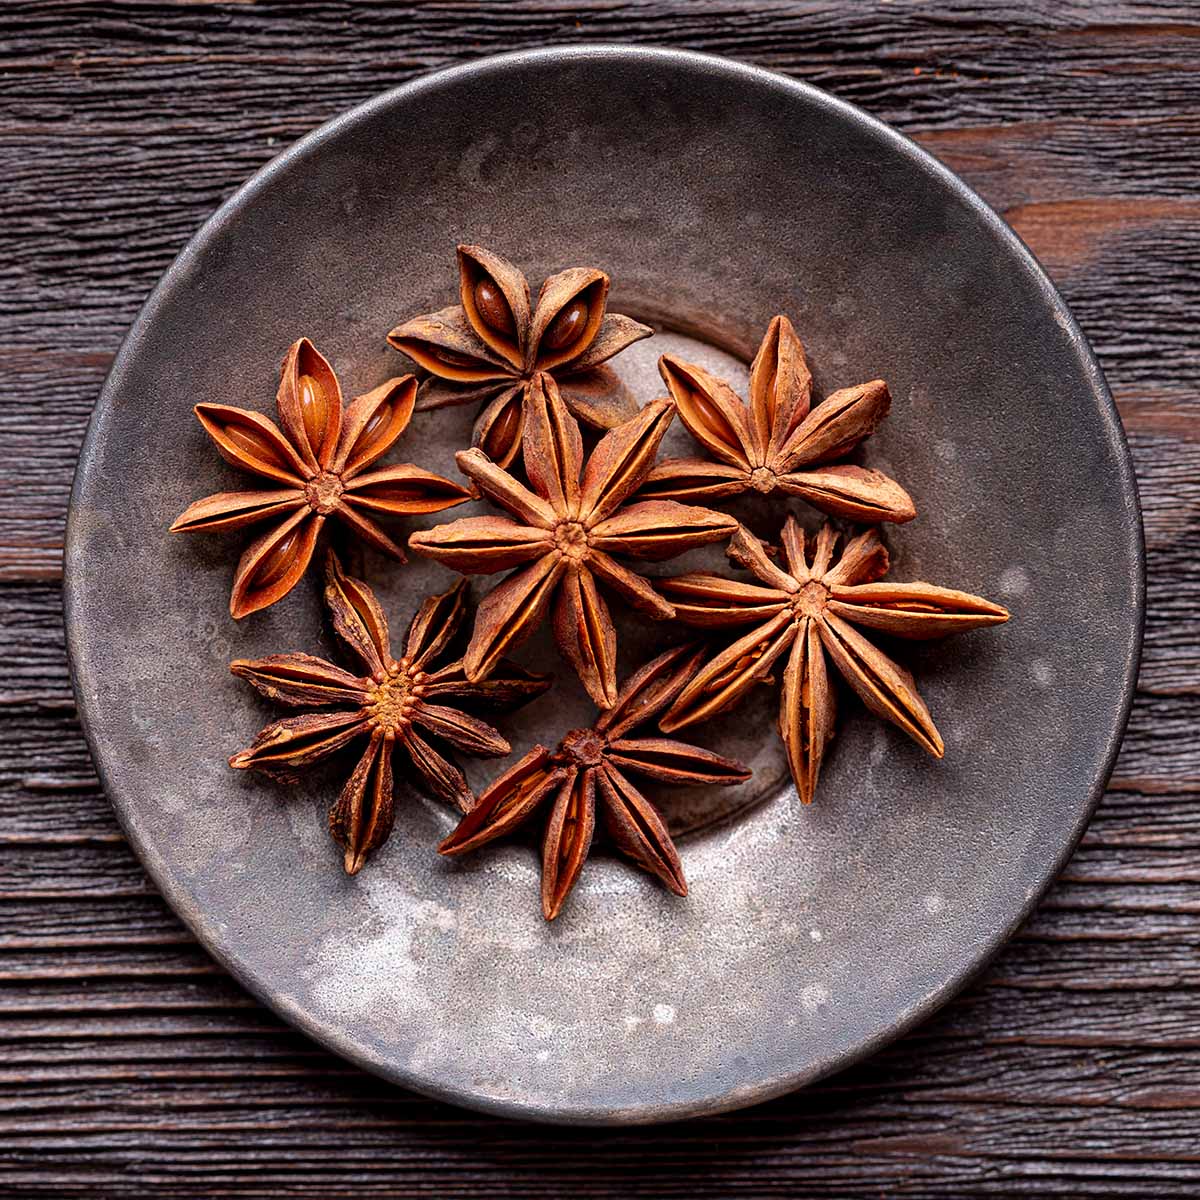 seven star anise on a plate. 